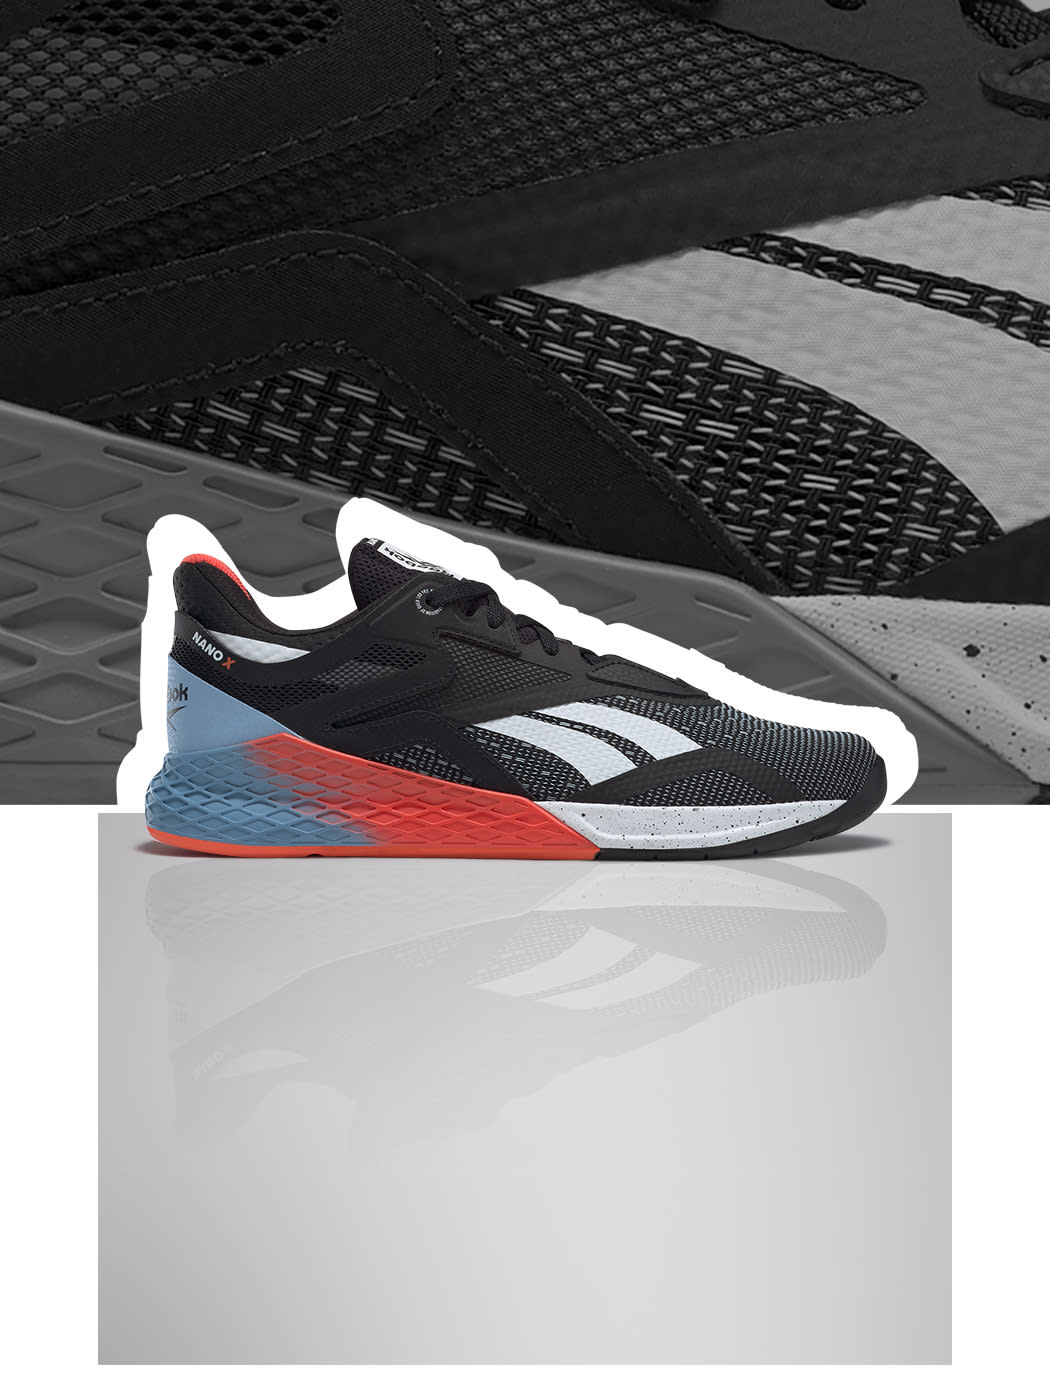 How to Use Black Card Discount Reebok?